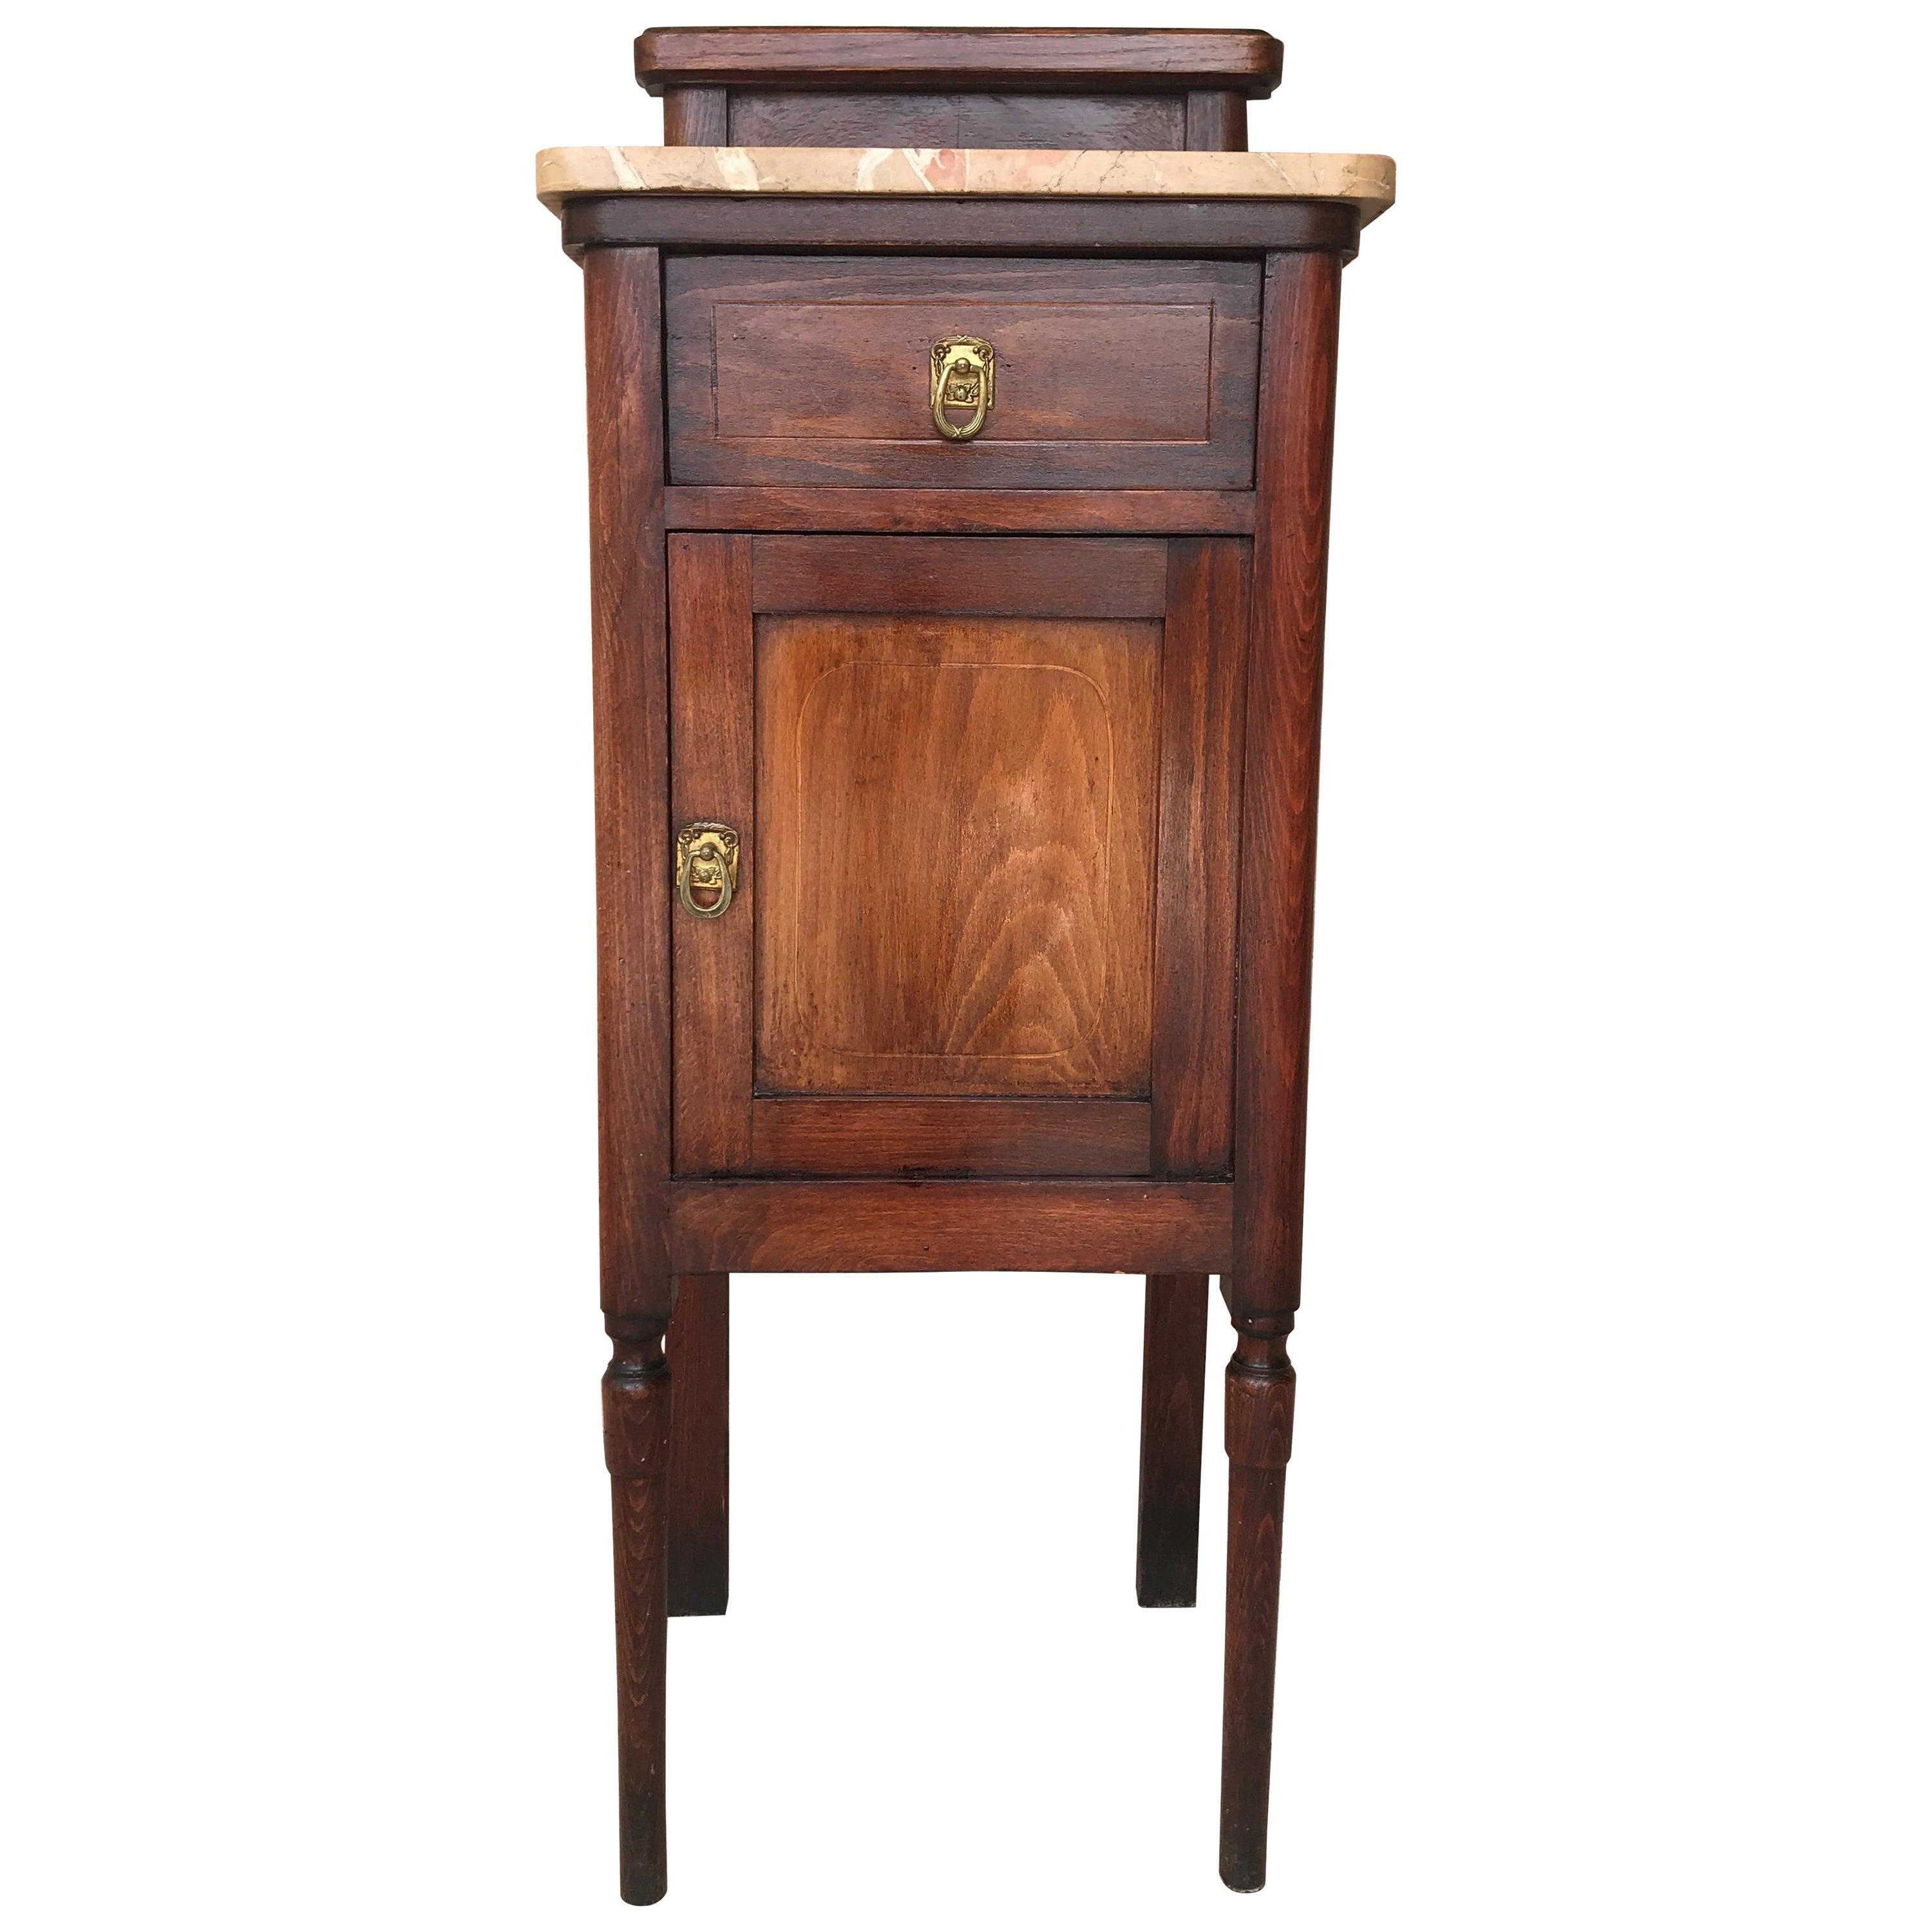 Art Nouveau Walnut Nightstand with Crest, Marble Top and Glass Shelve